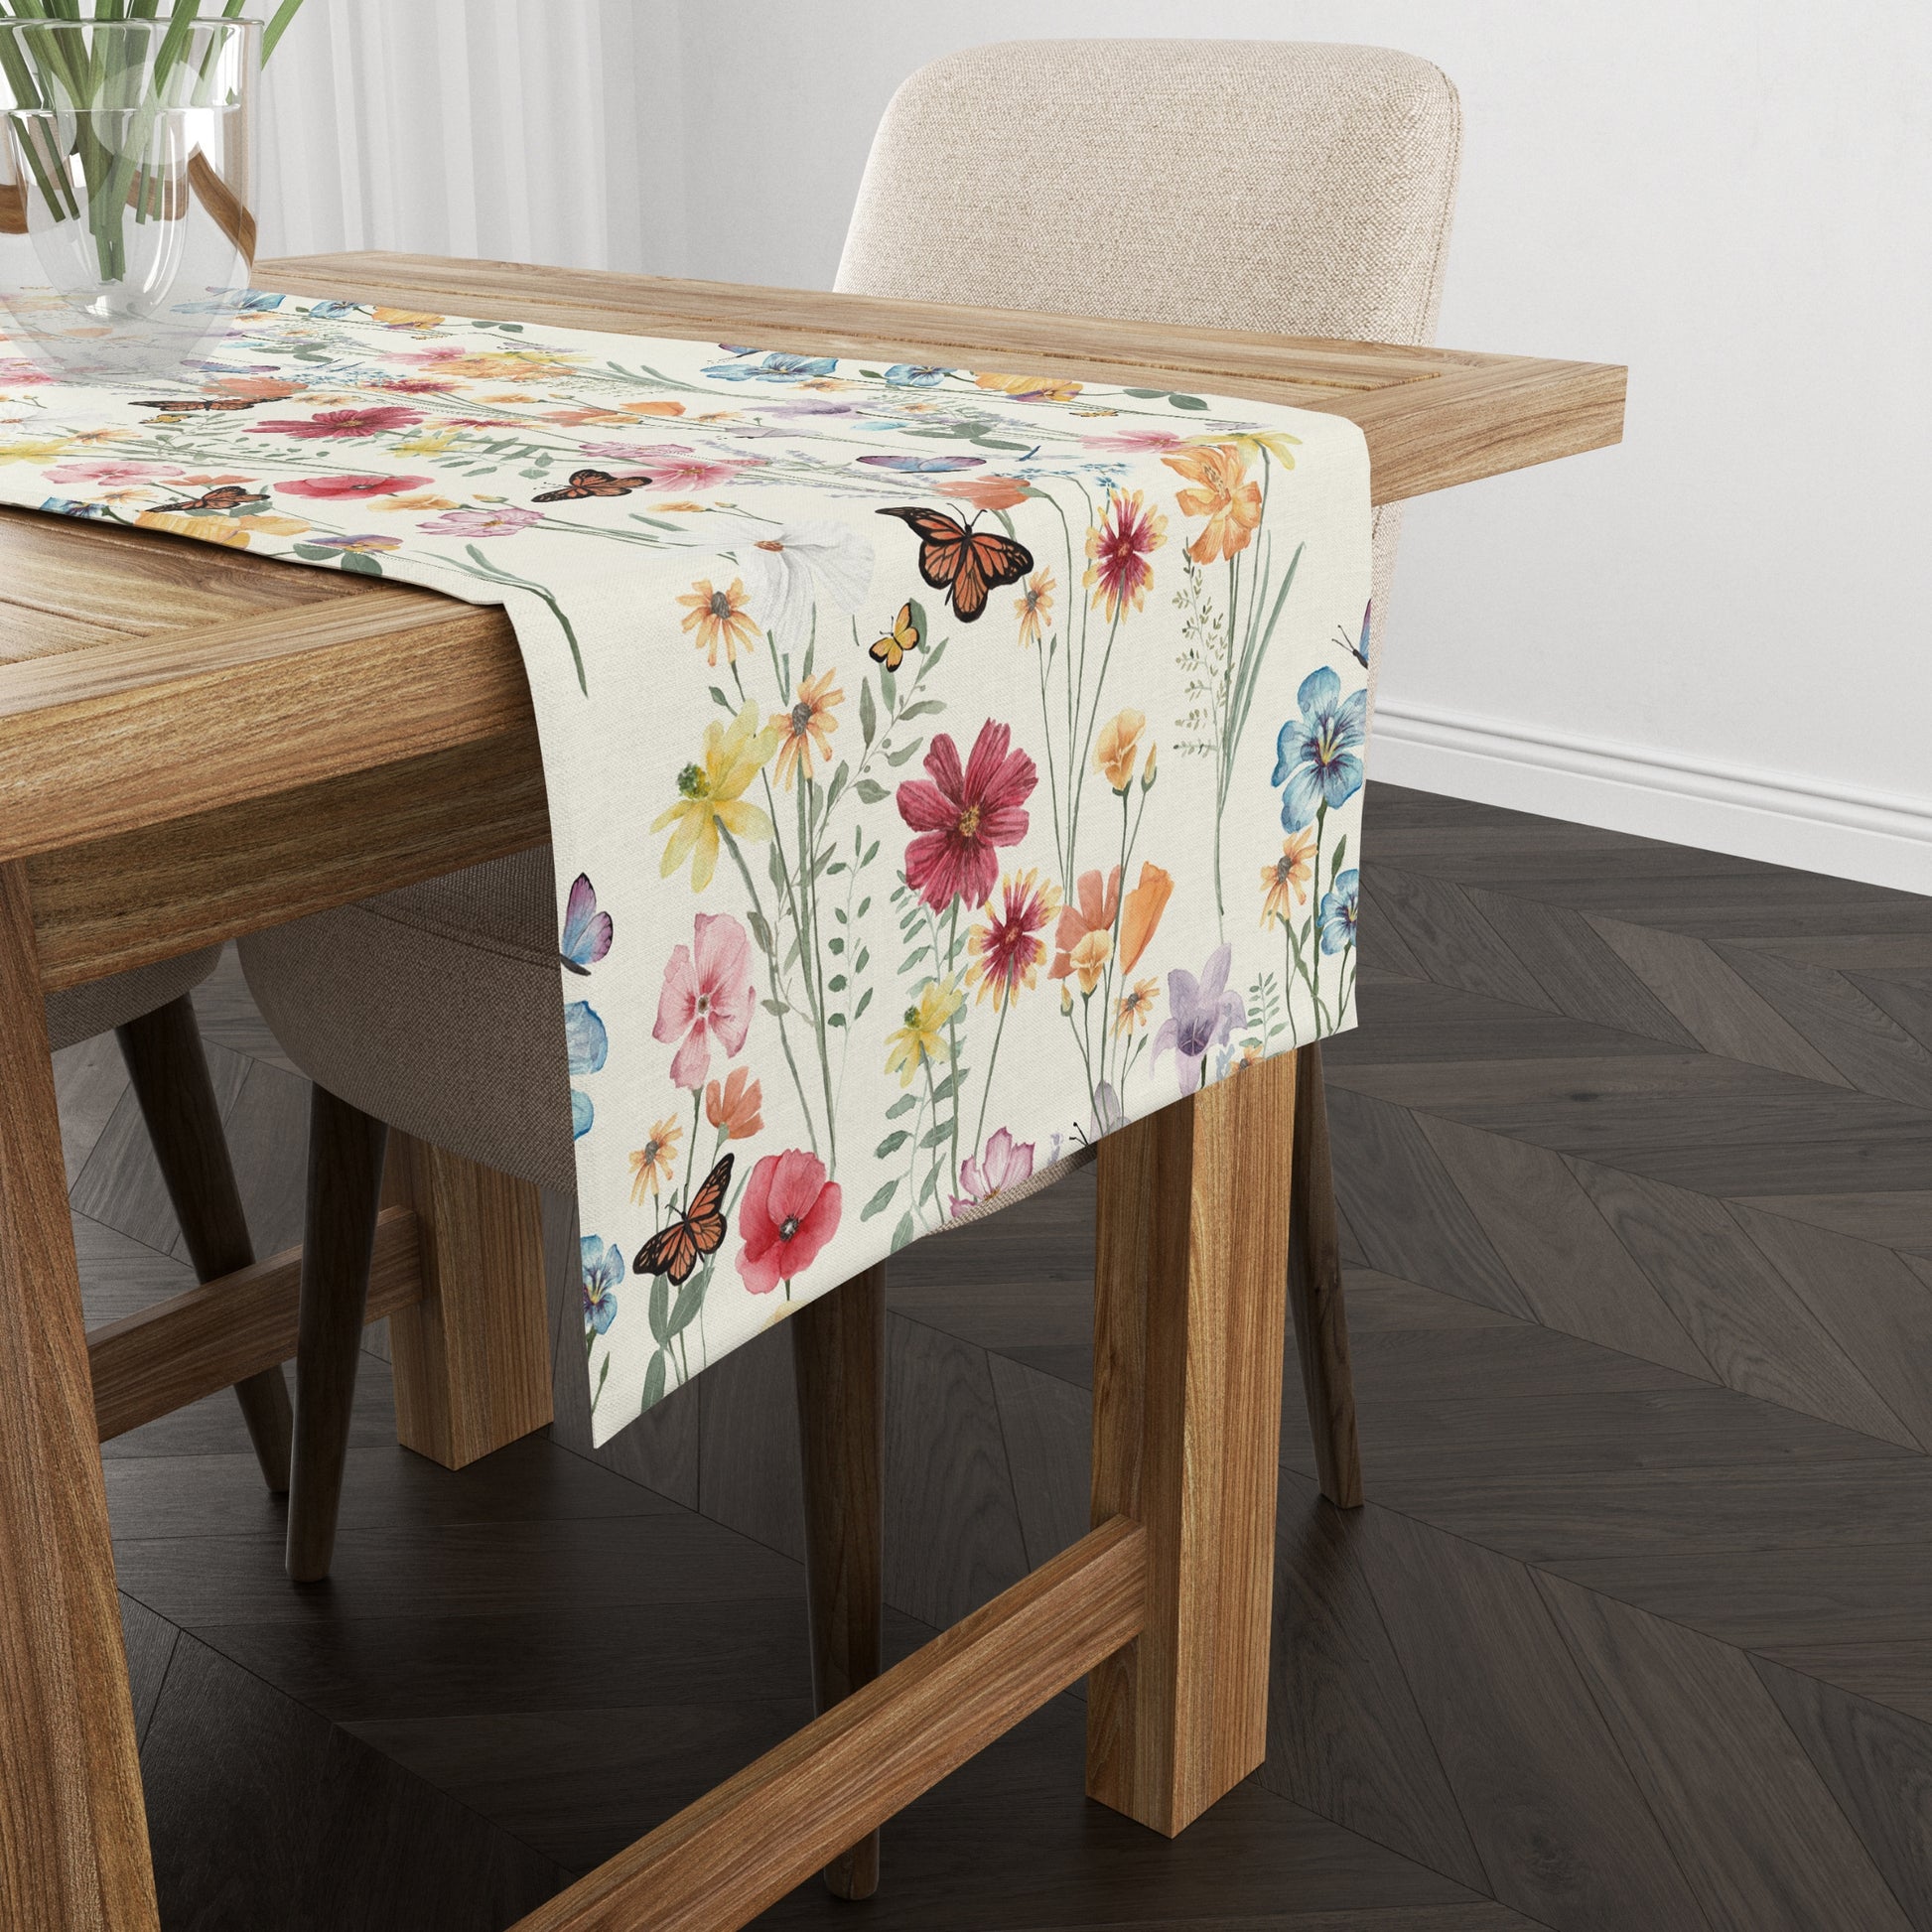 a table with a beautiful botanical table runner with flower vase on it